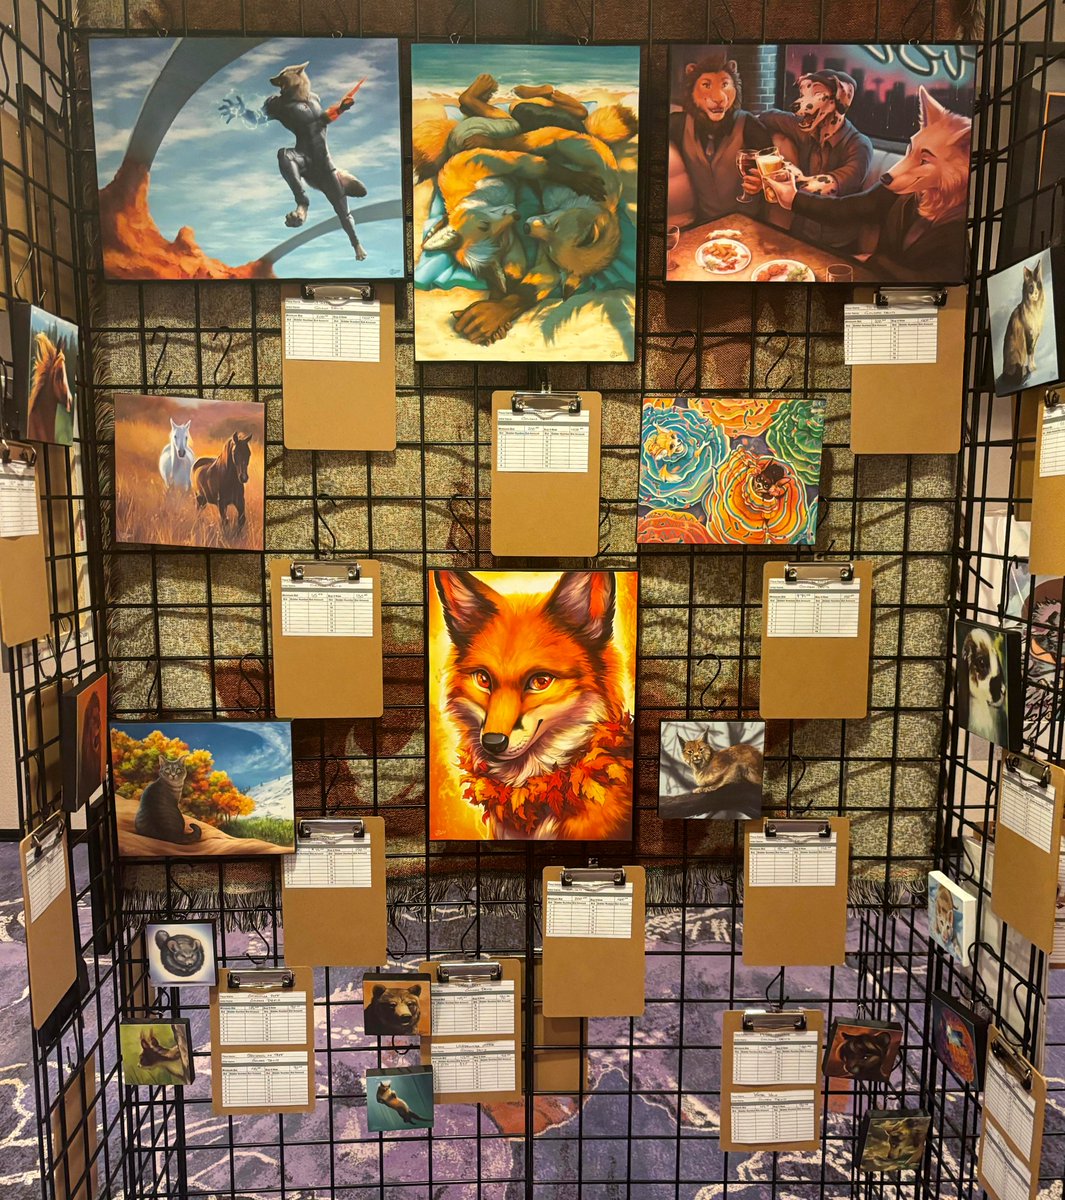 If you are at #goldenstatefurcon swing by the art show today for your last chance to take home my work!